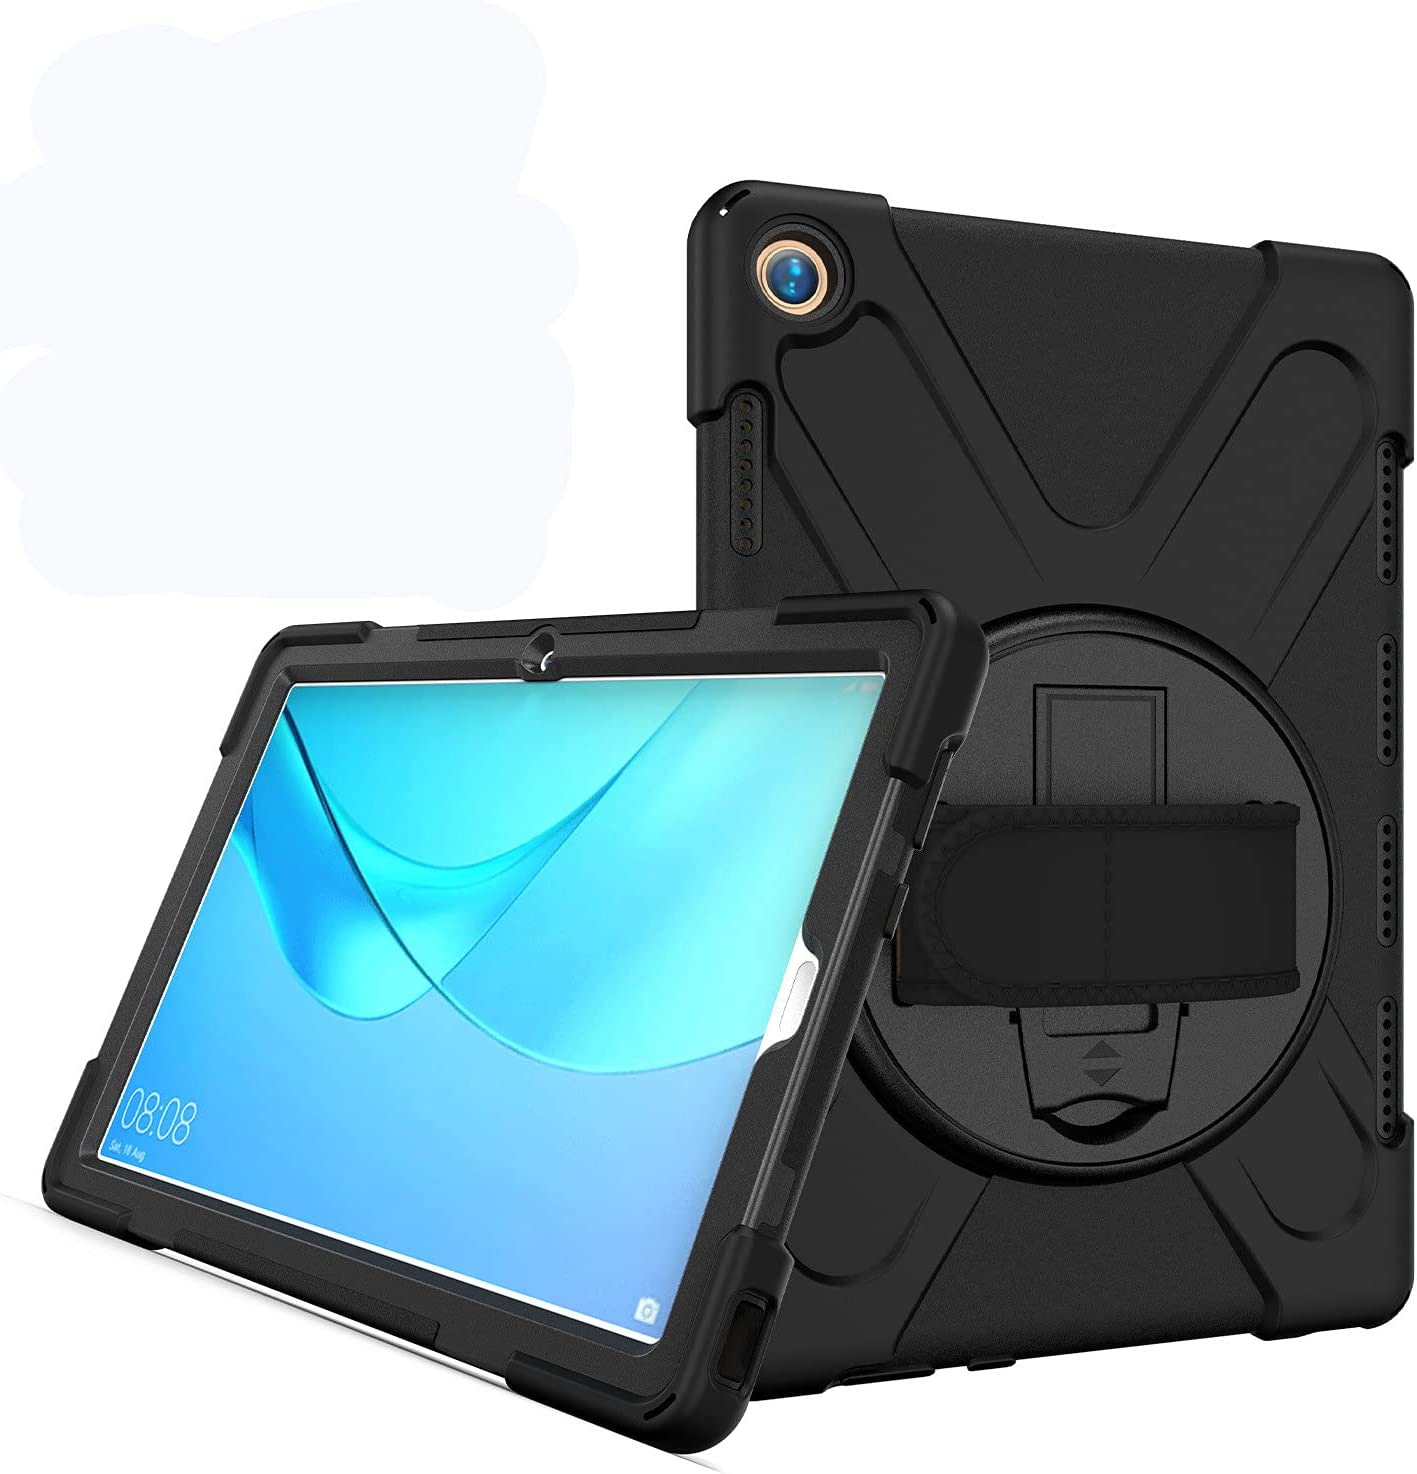 Case for Huawei MediaPad M5 10.8" & Huawei MediaPad M5 Pro 10.8", Military Grade [15 ft Drop Tested] Full-Body Shockproof Protective Cover with 360? Rotation Stand & Hand Strap (Black)